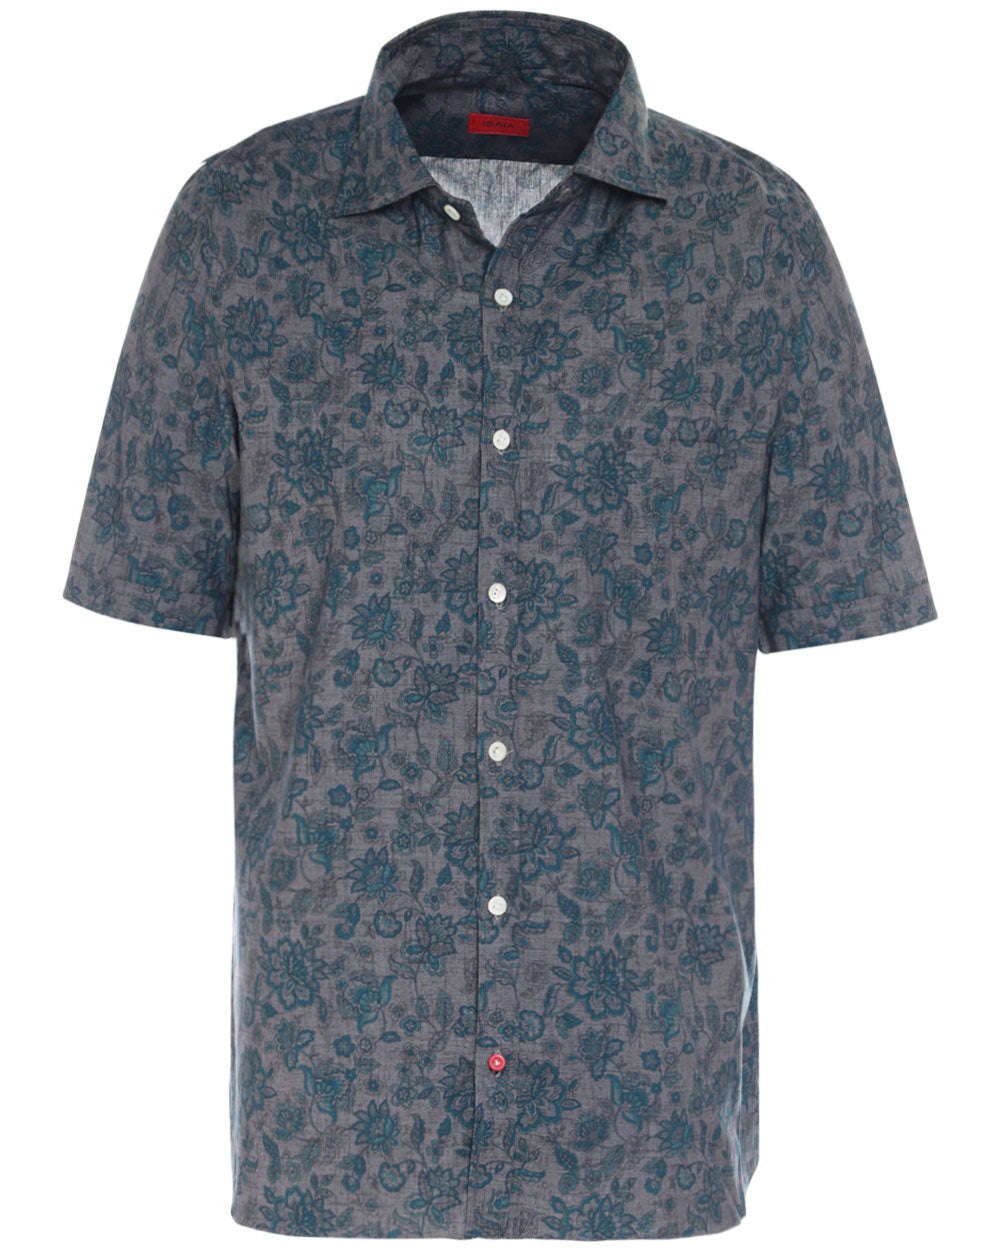 Grey and Teal Floral Print Cotton Short Sleeve Sportshirt